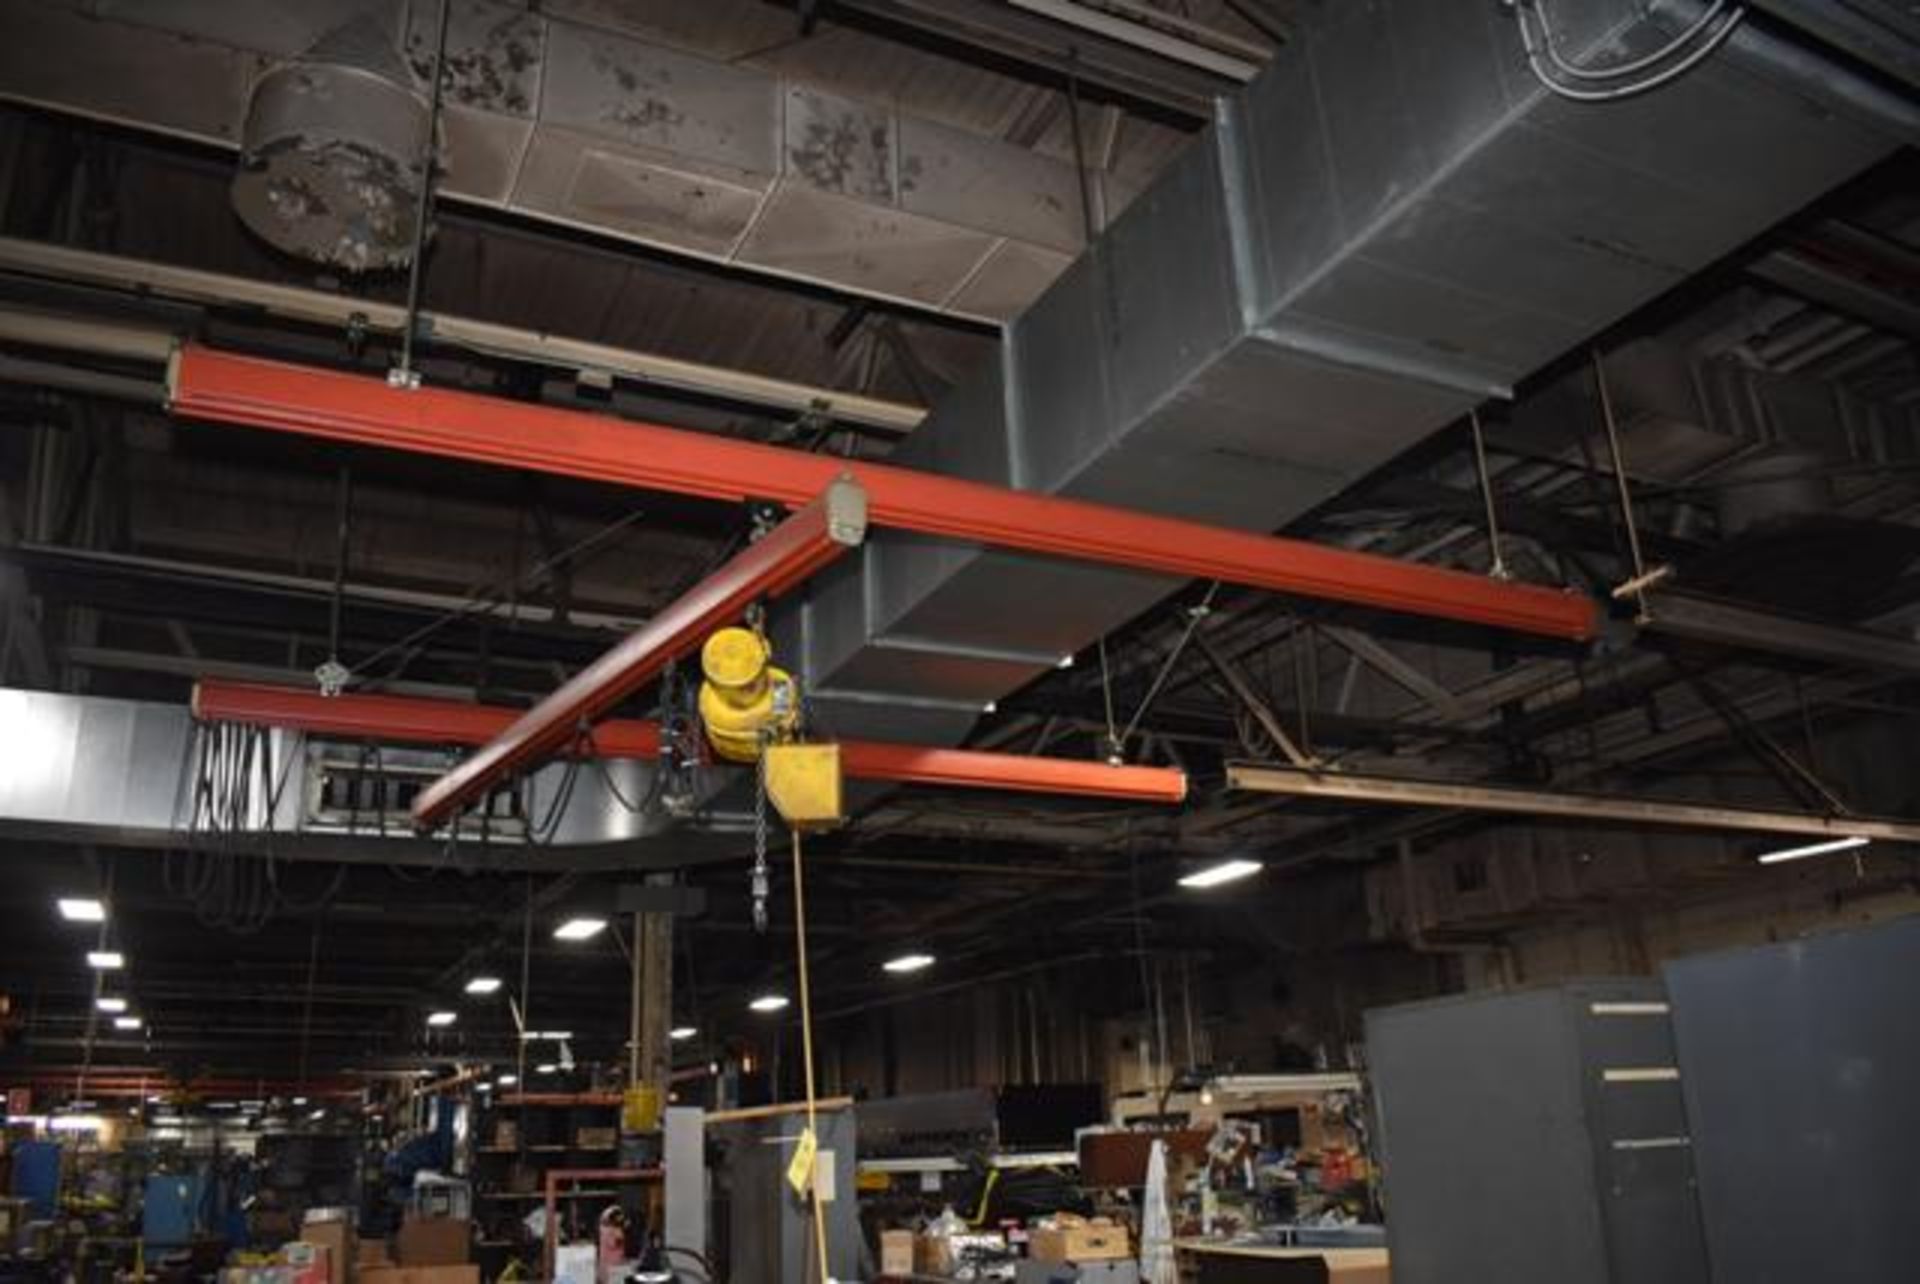 Demag Crane System, Approx. 12' x 12' Floor Space w/Budgit 1/4 Ton Electric Chain Hoist